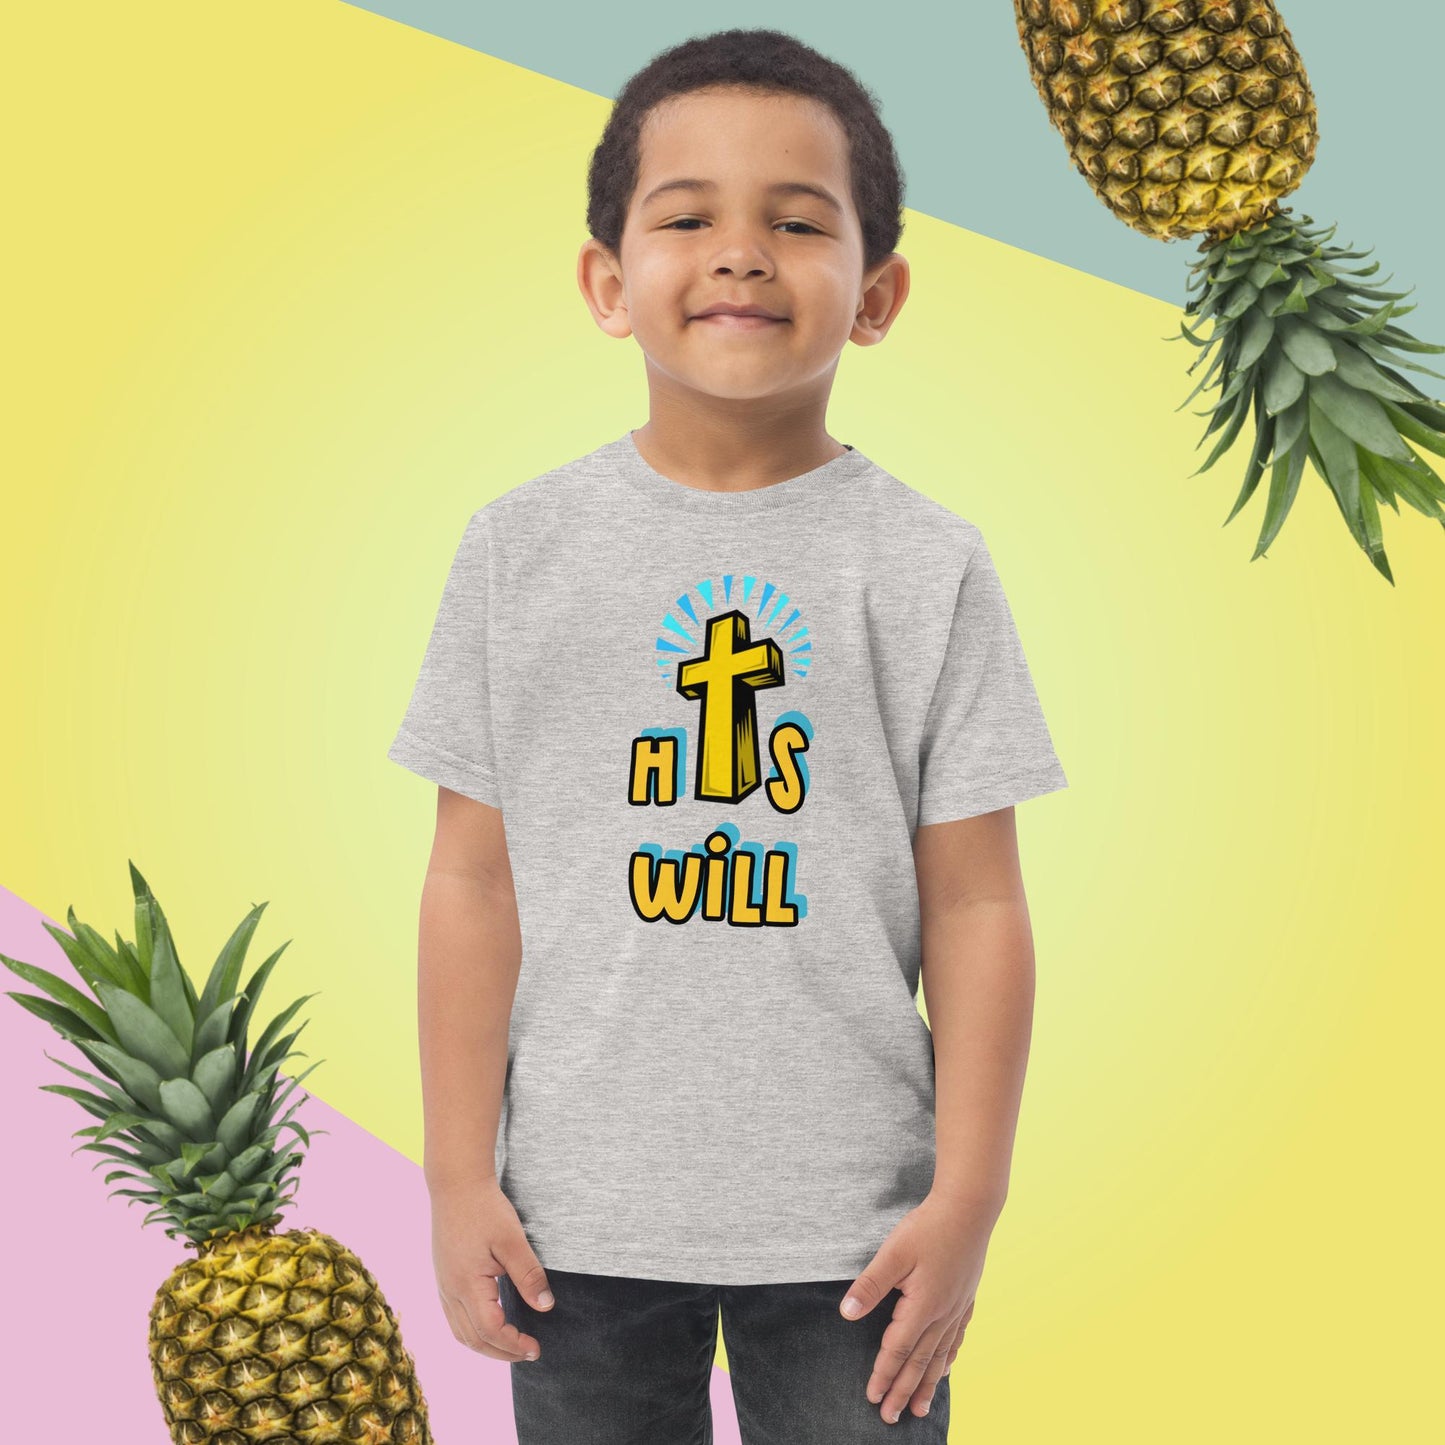 "HIS WILL" Toddler jersey t-shirt